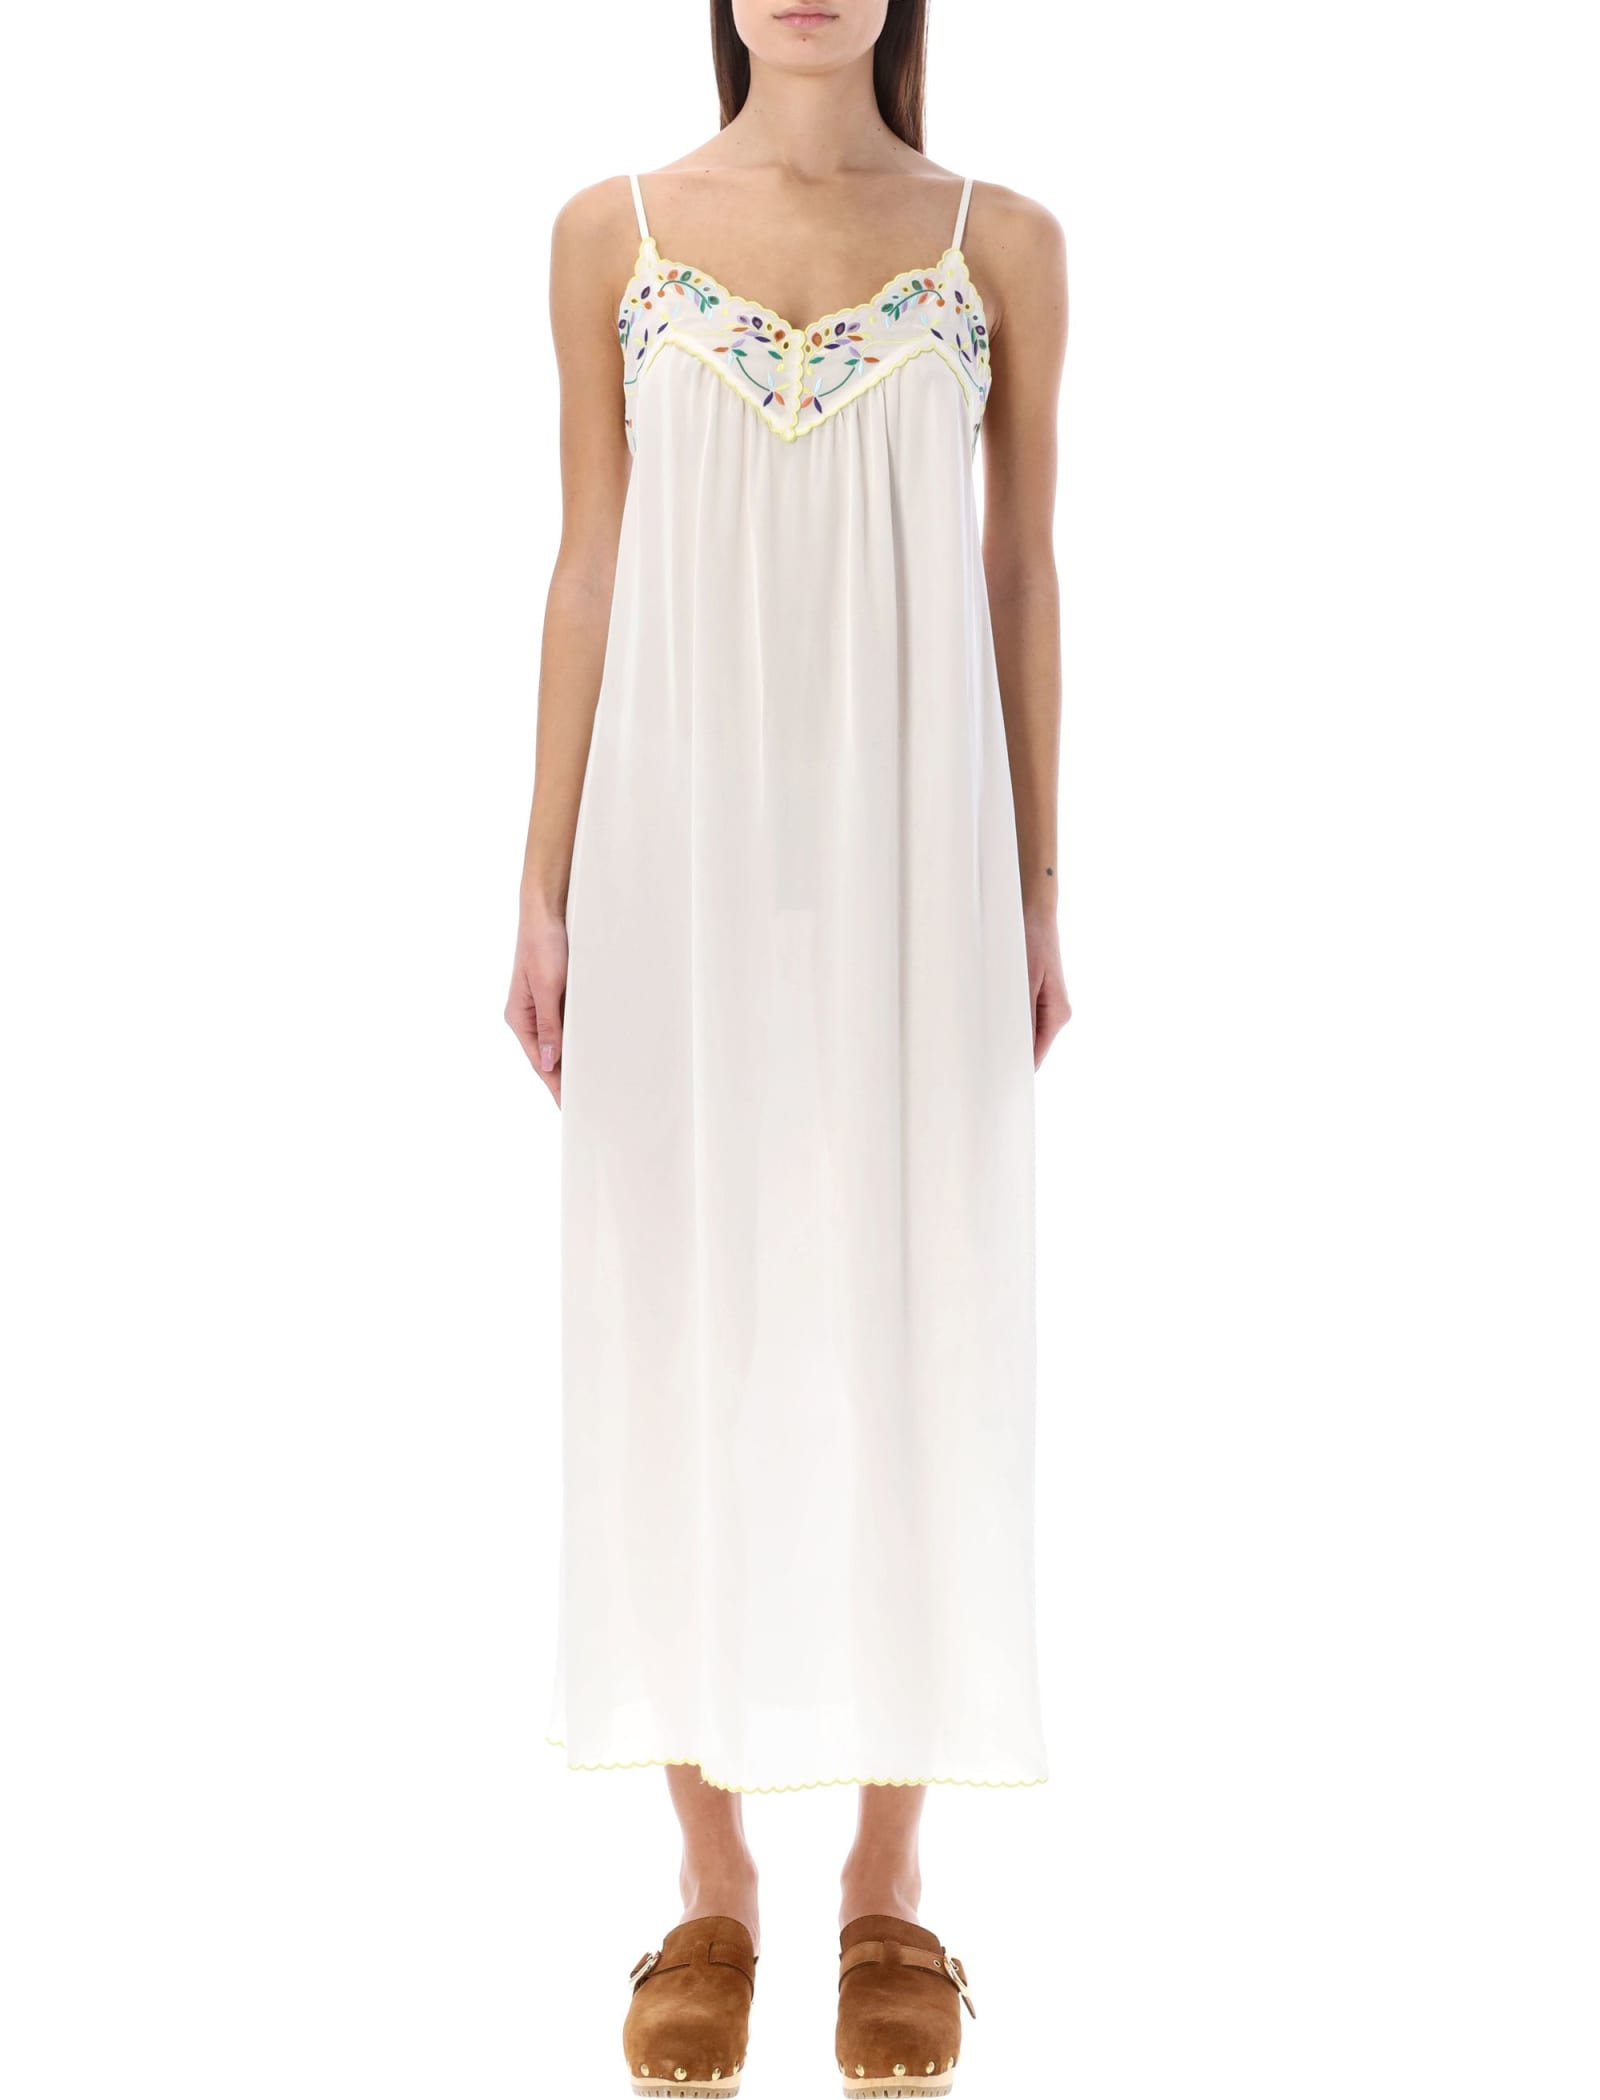 SEE BY CHLOÉ EMBROIDERED SLIP DRESS